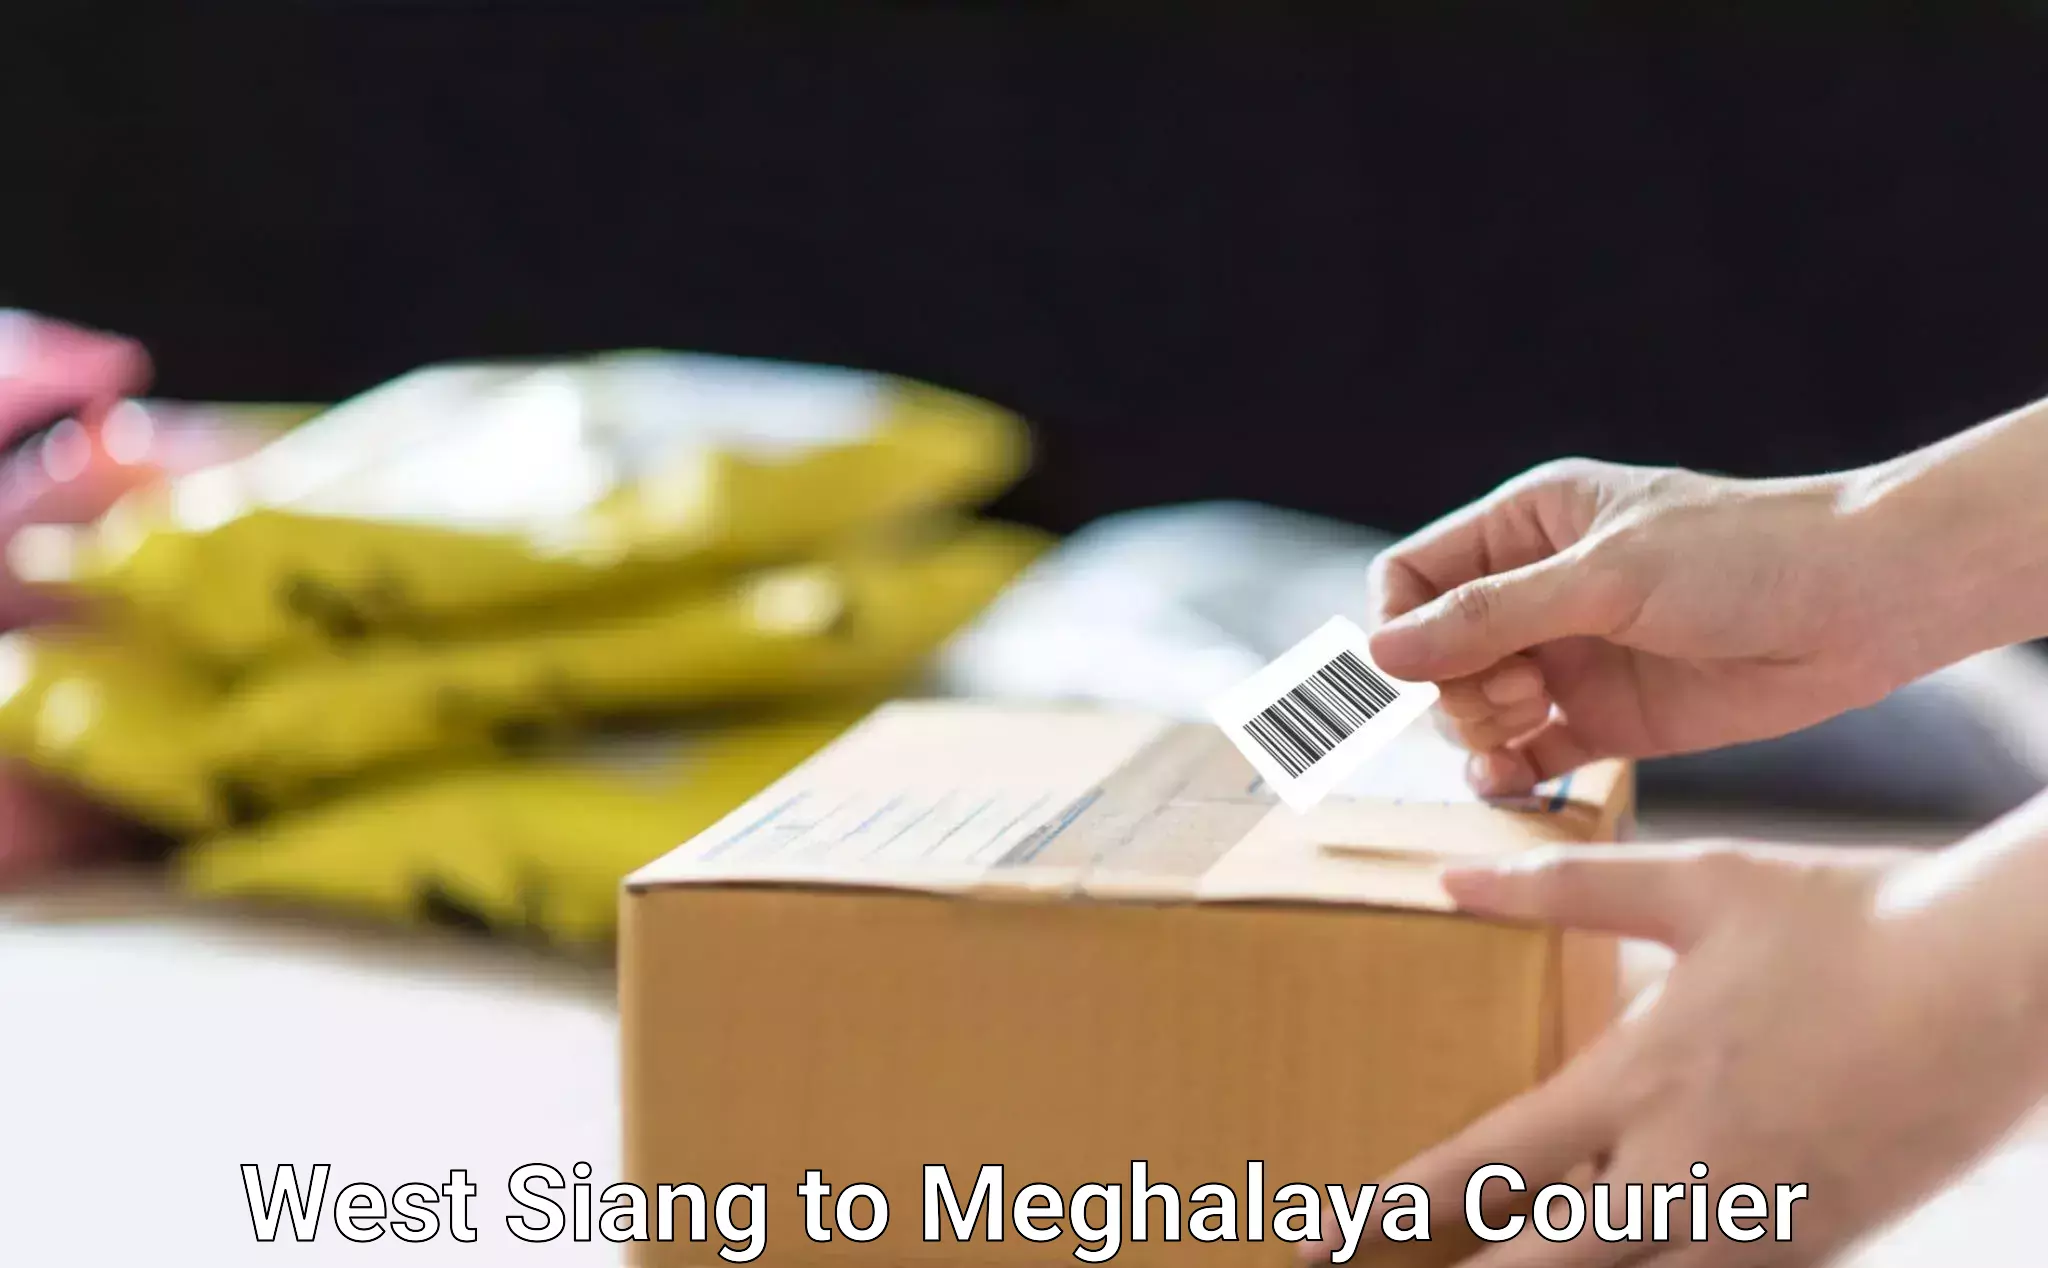 Courier services in West Siang to Meghalaya